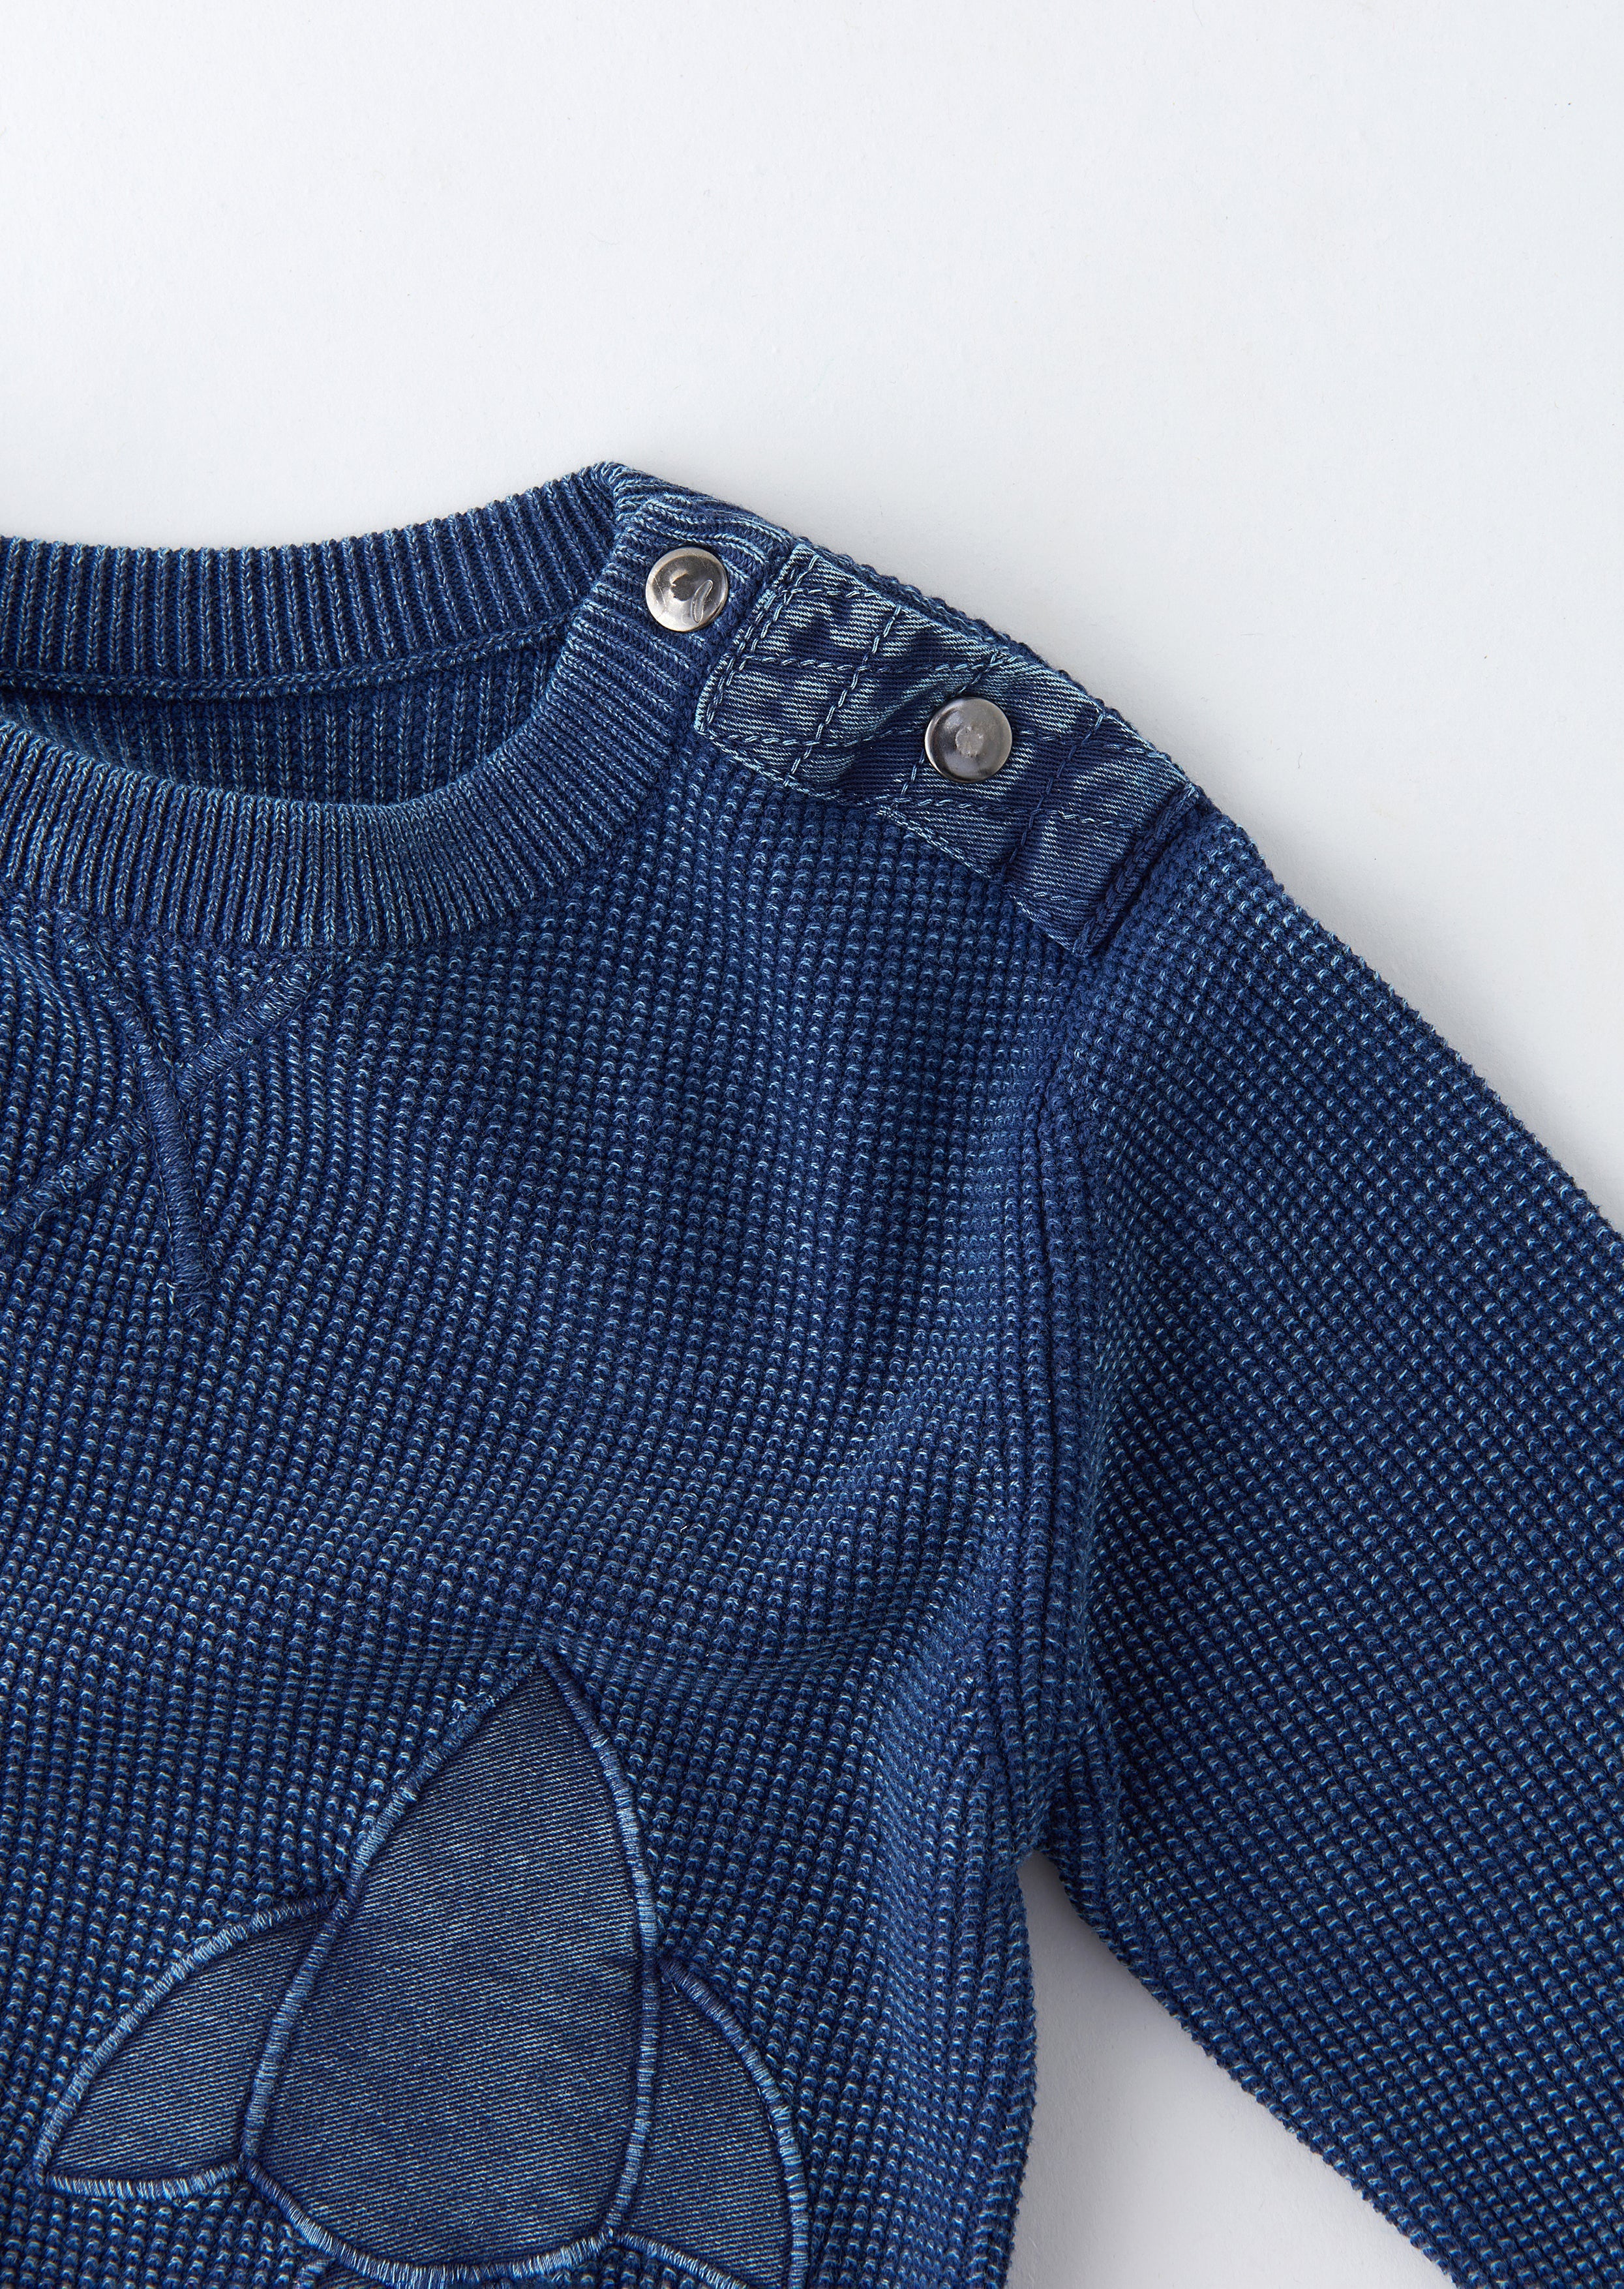 Baby Boy Rocket Embroidered Blue Sweater